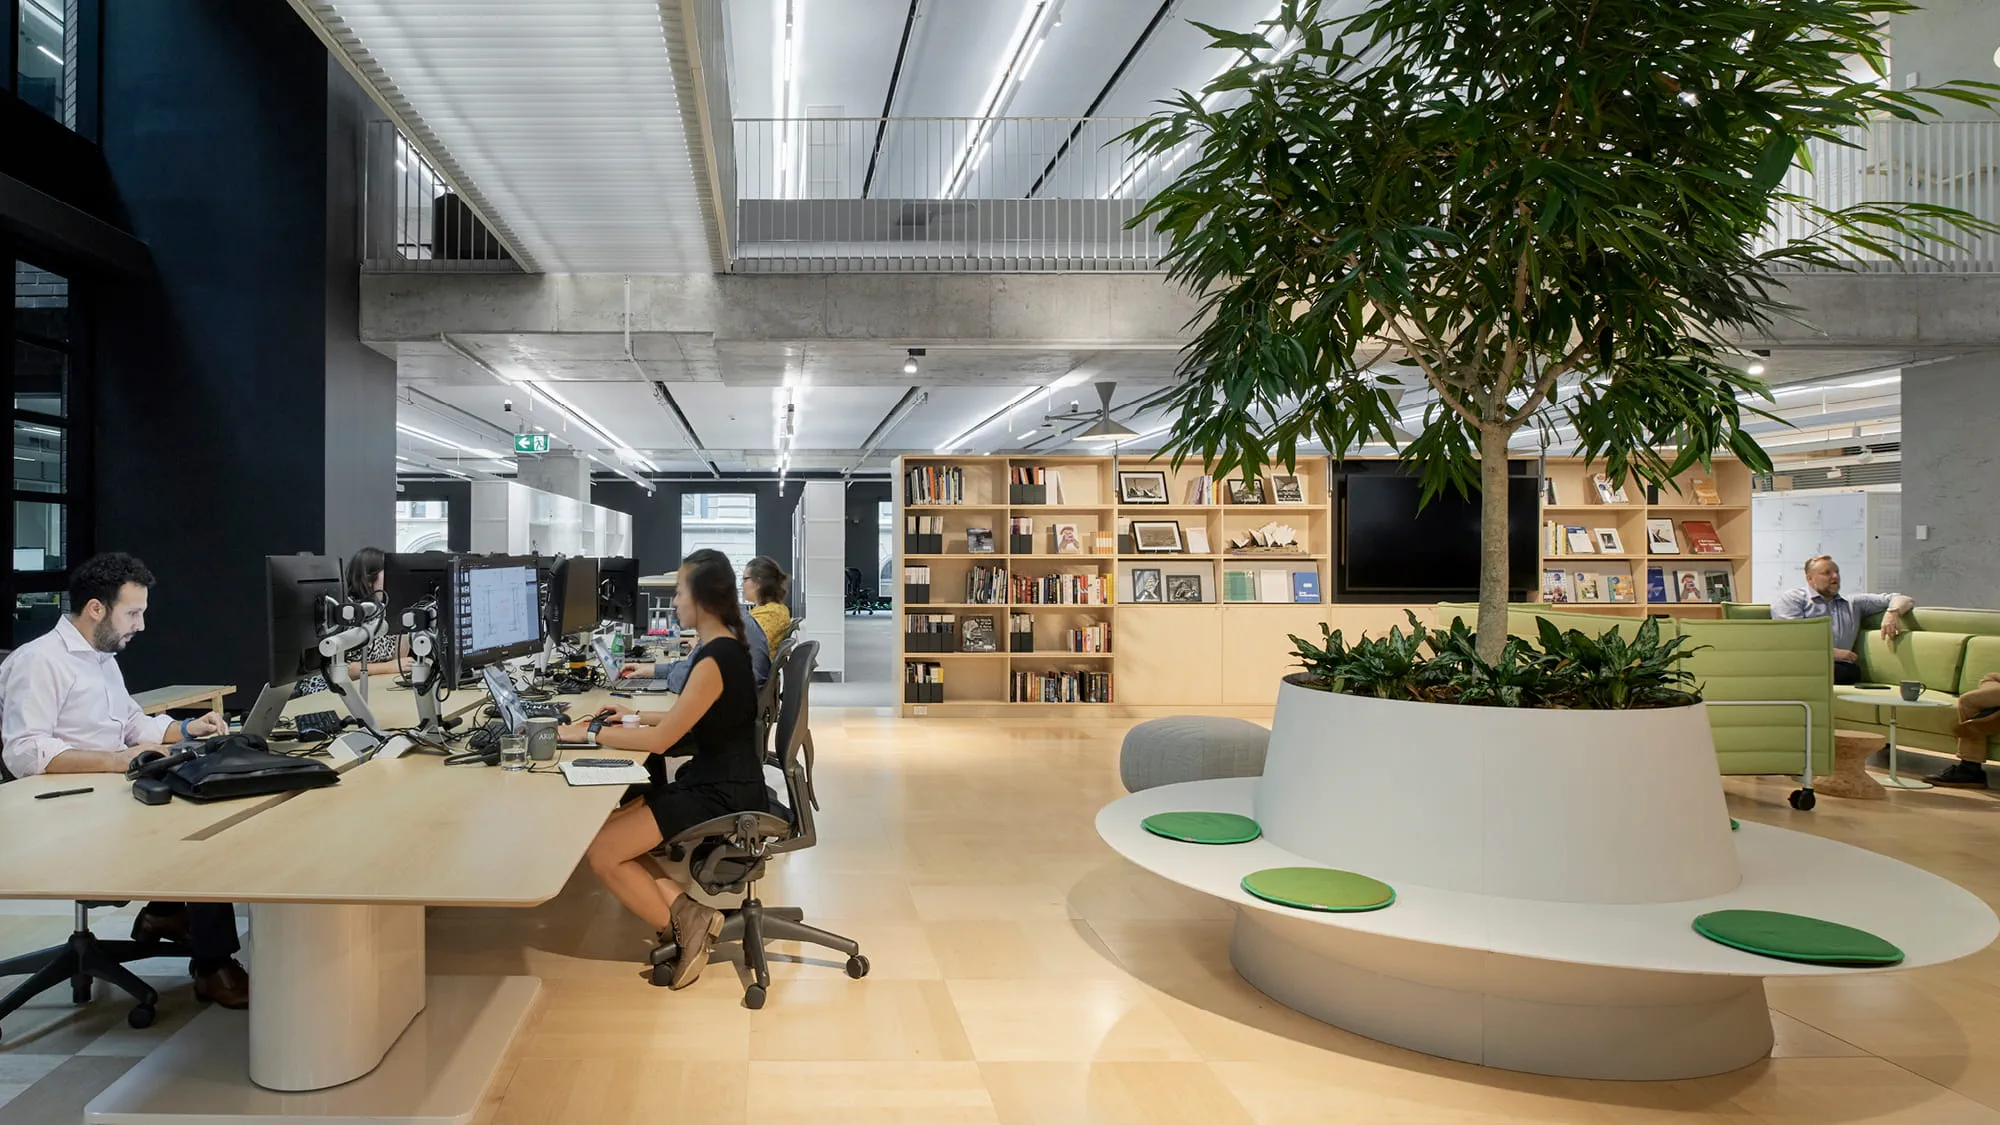 The Arup University space in Arup's Sydney office